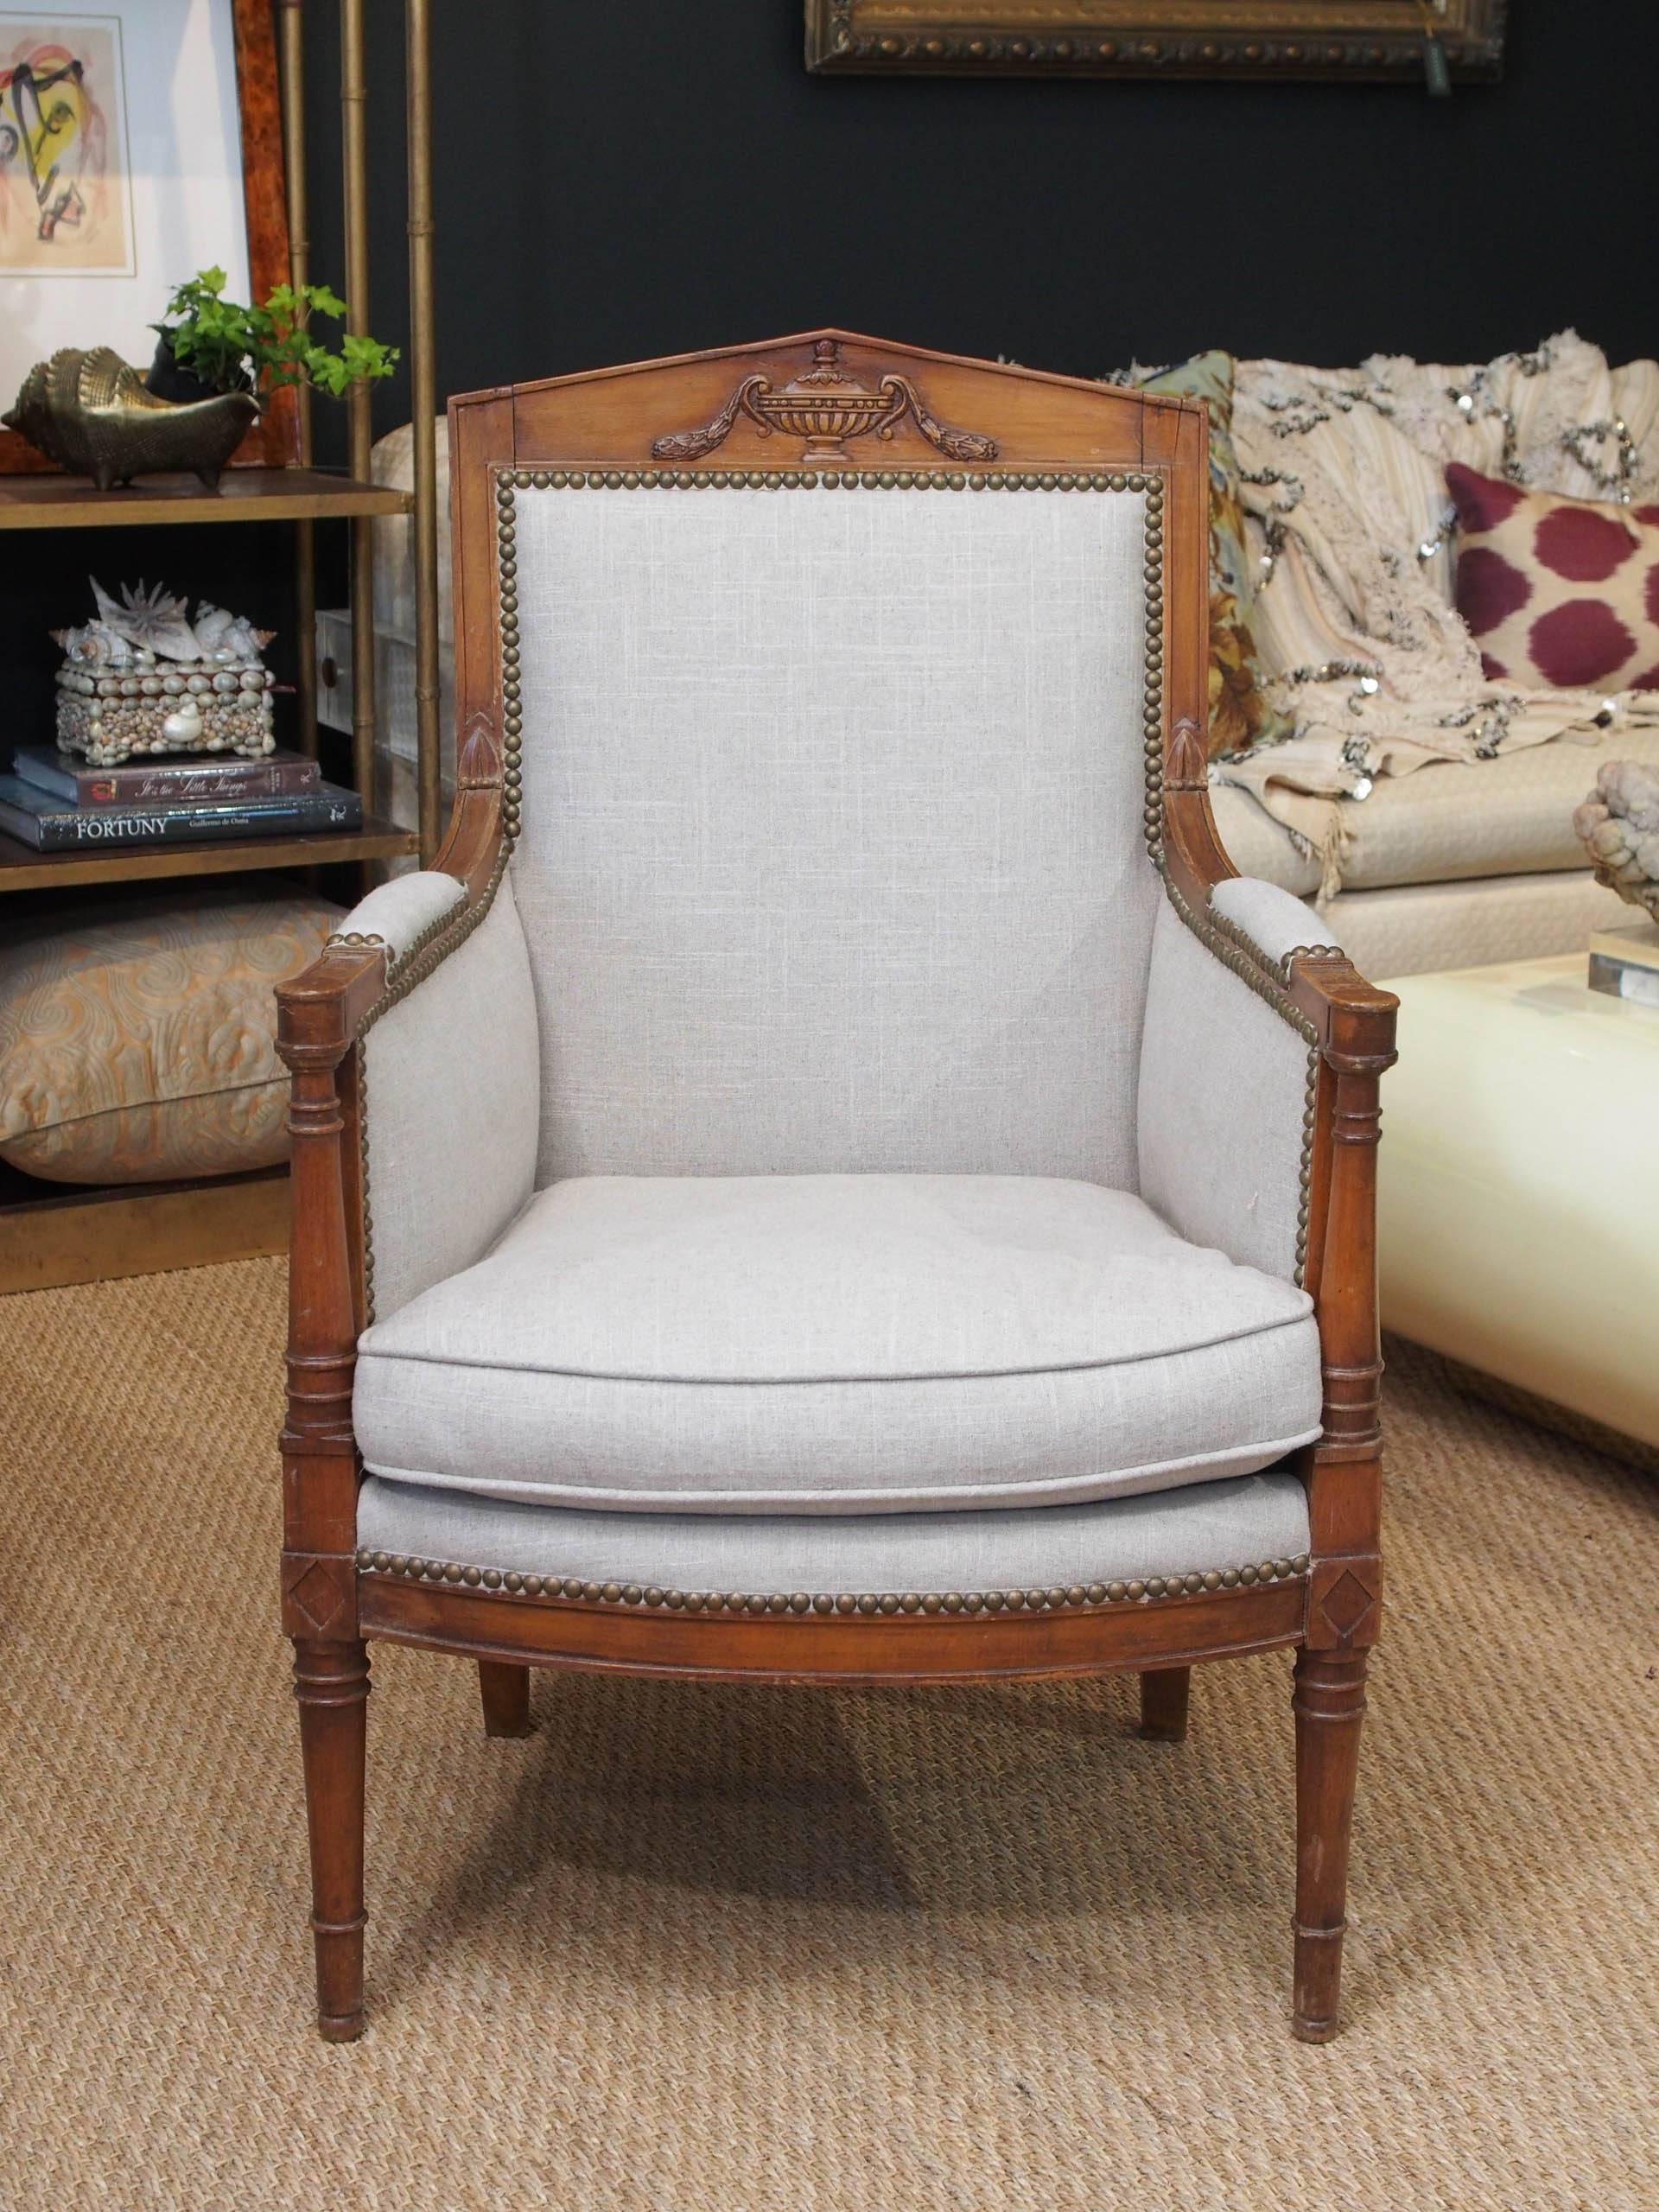 Pair of French Empire walnut bergère chairs covered in neutral linen with nailhead trim.